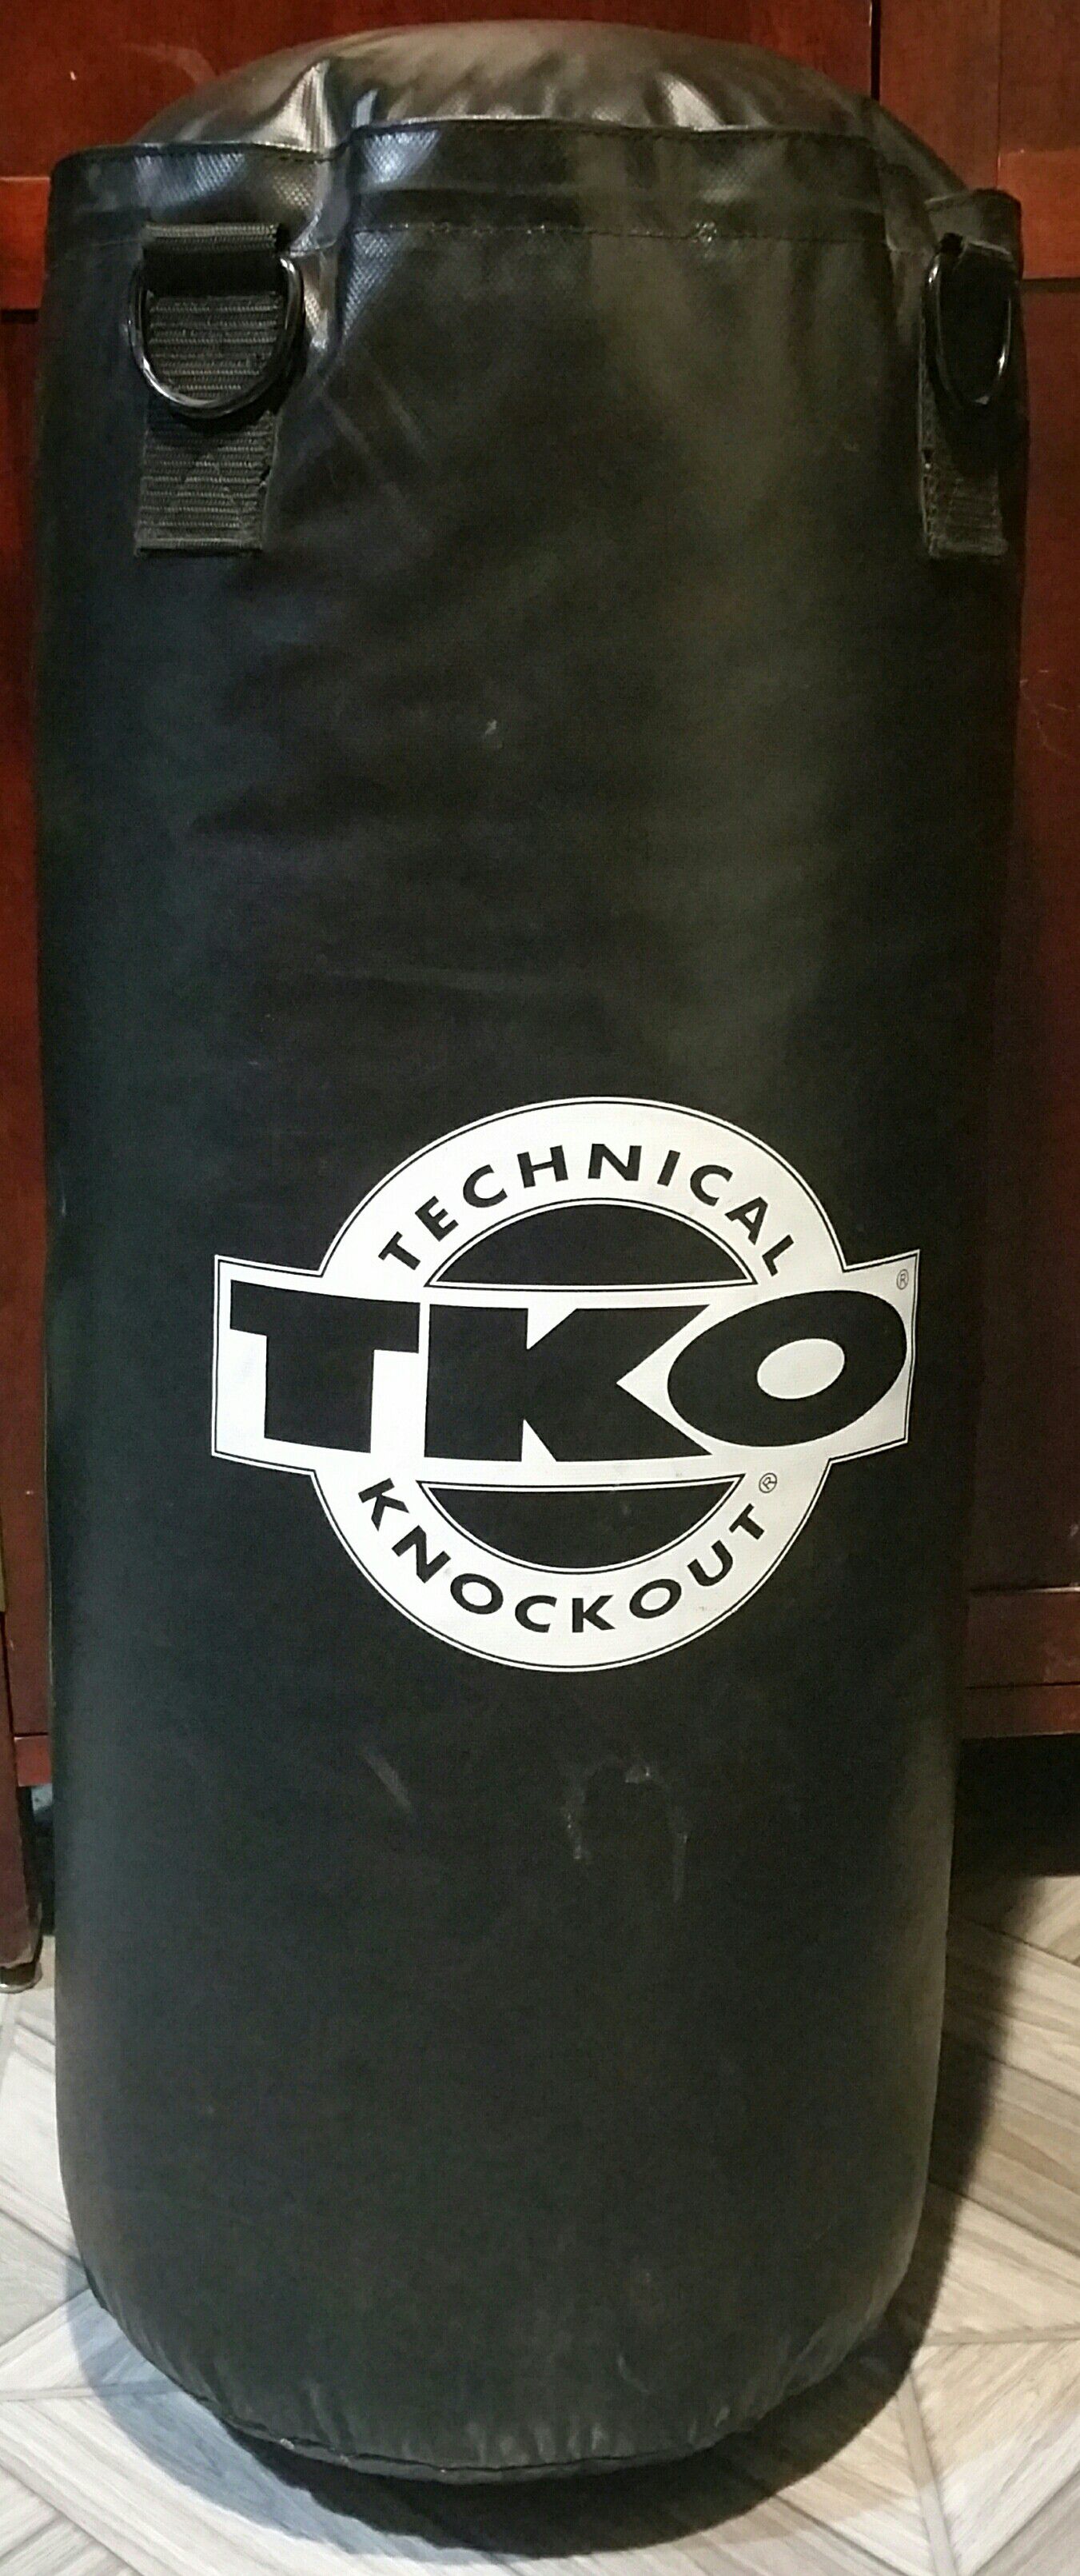 Technical Knock Out Martial Art Boxing Punching Bag